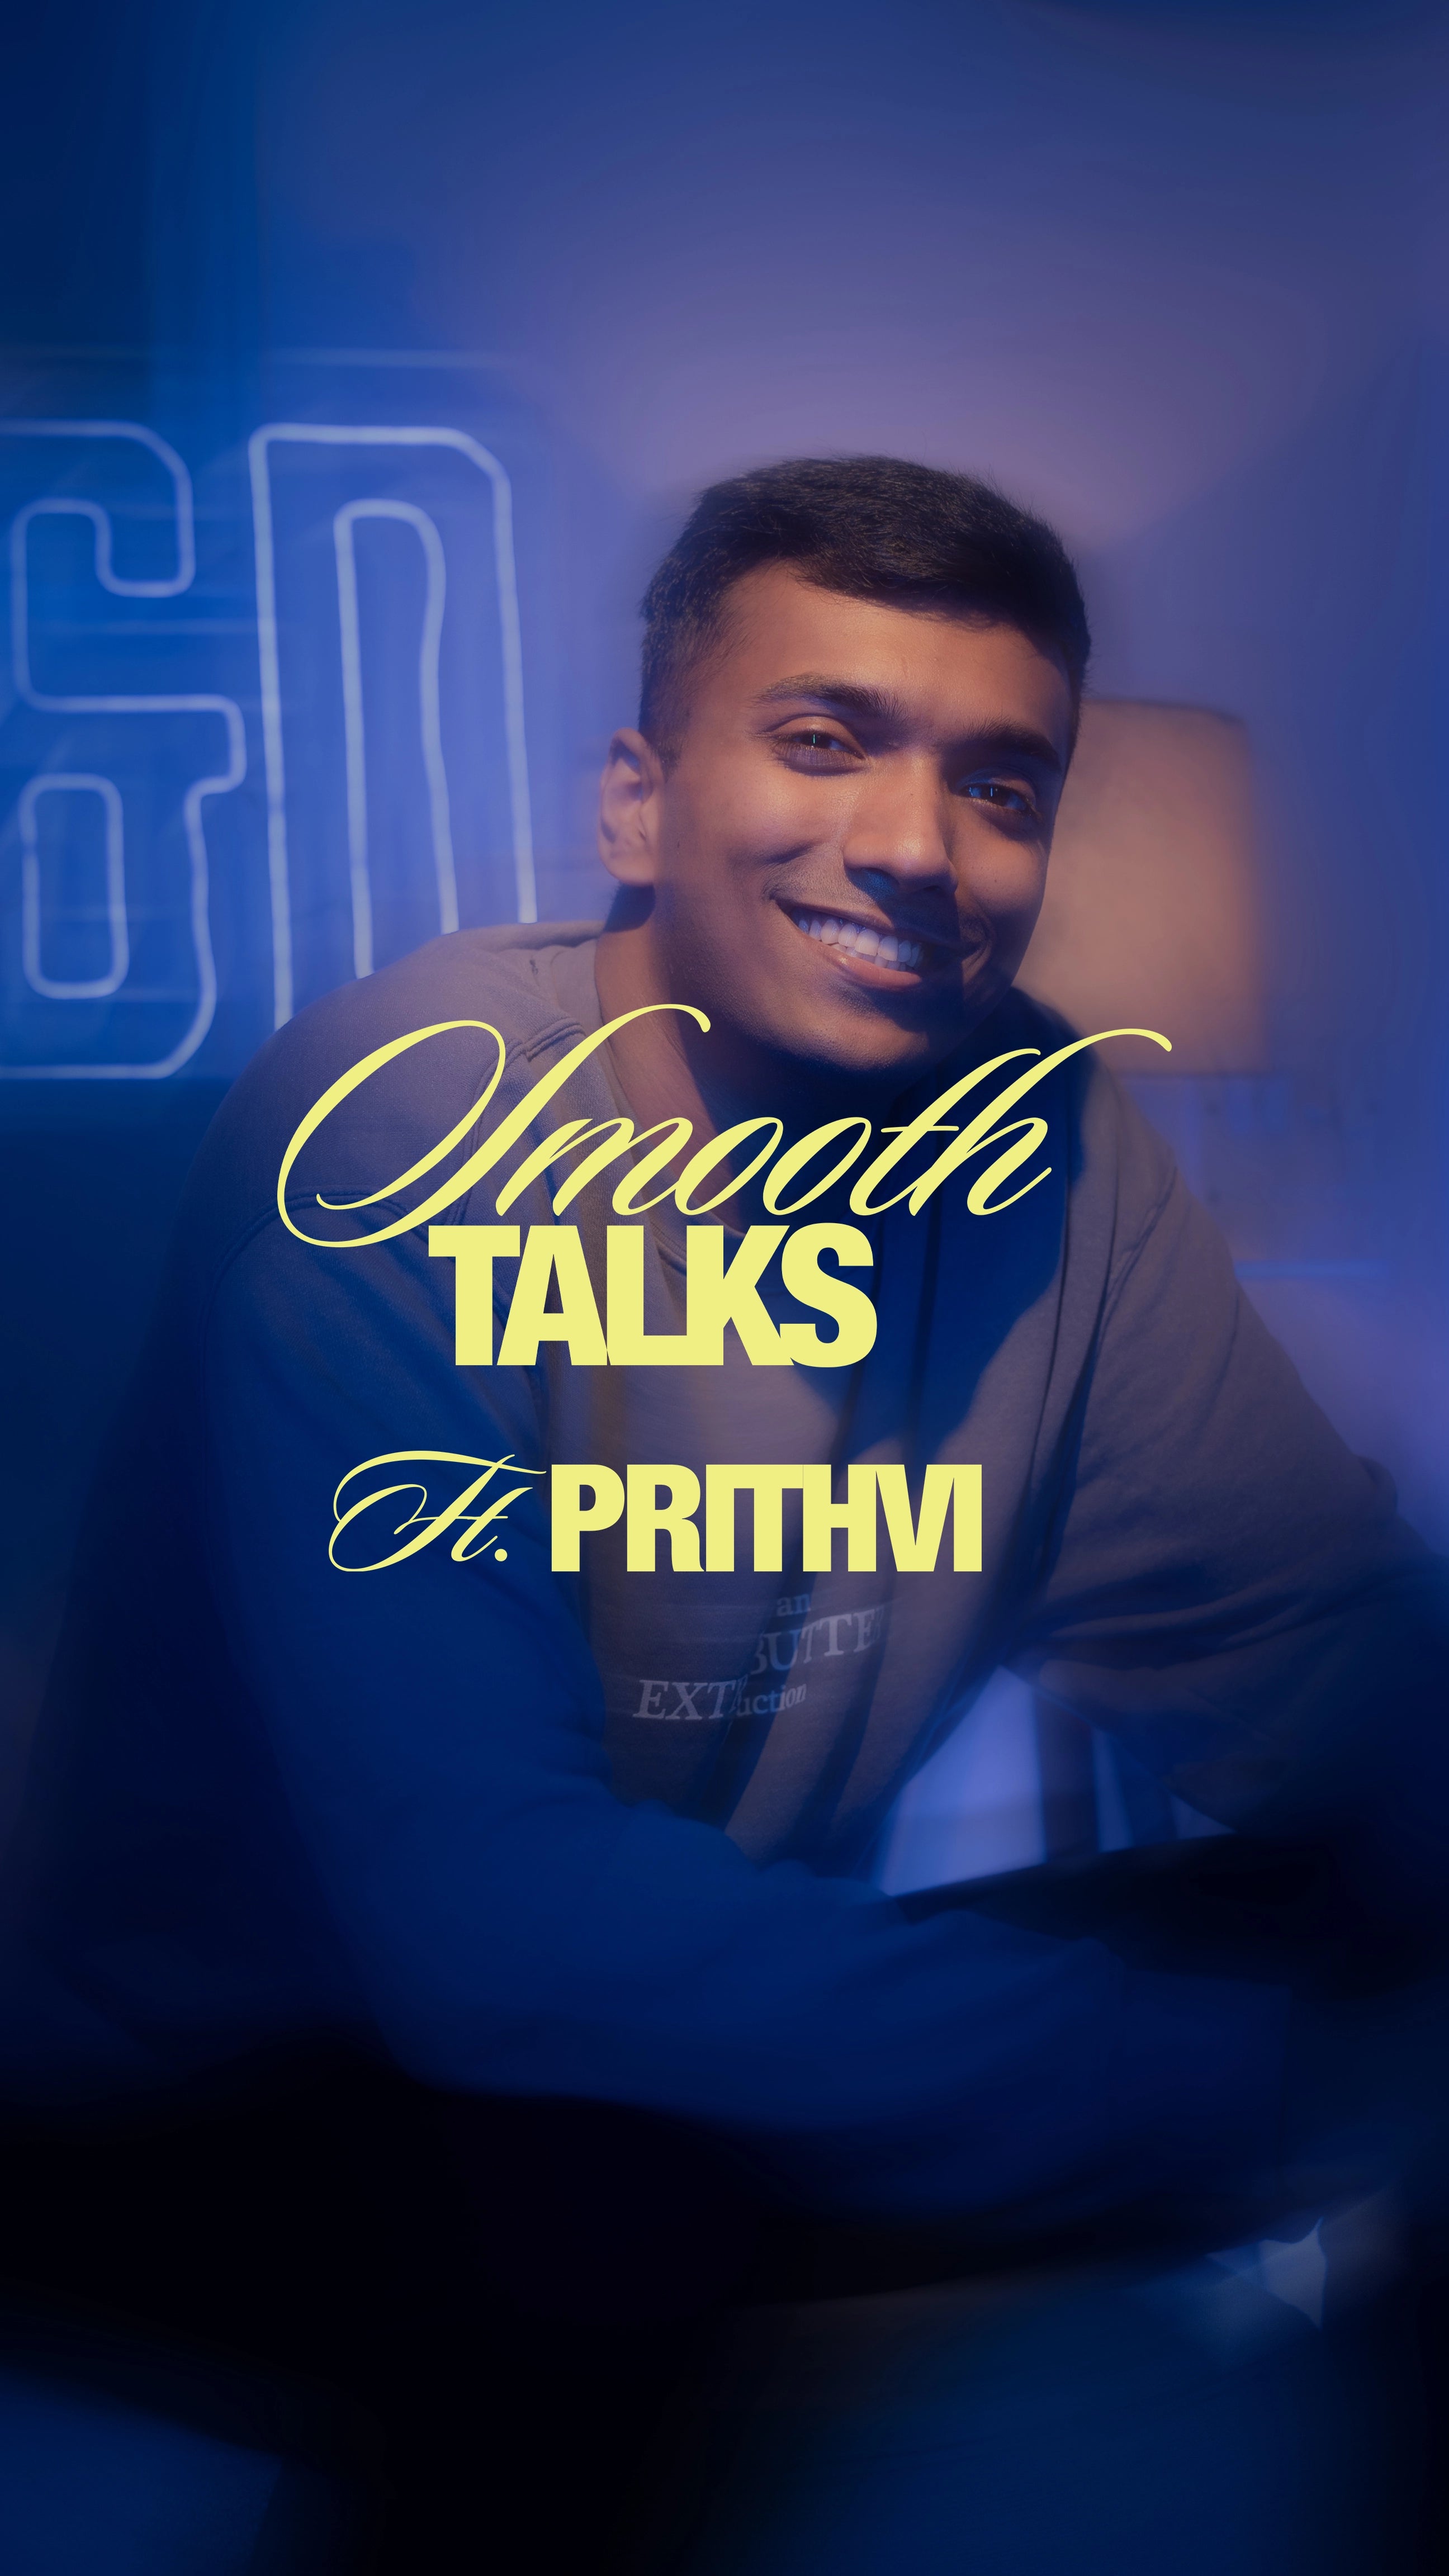 Extra Butter Smooth Talks: Featuring Prithvi